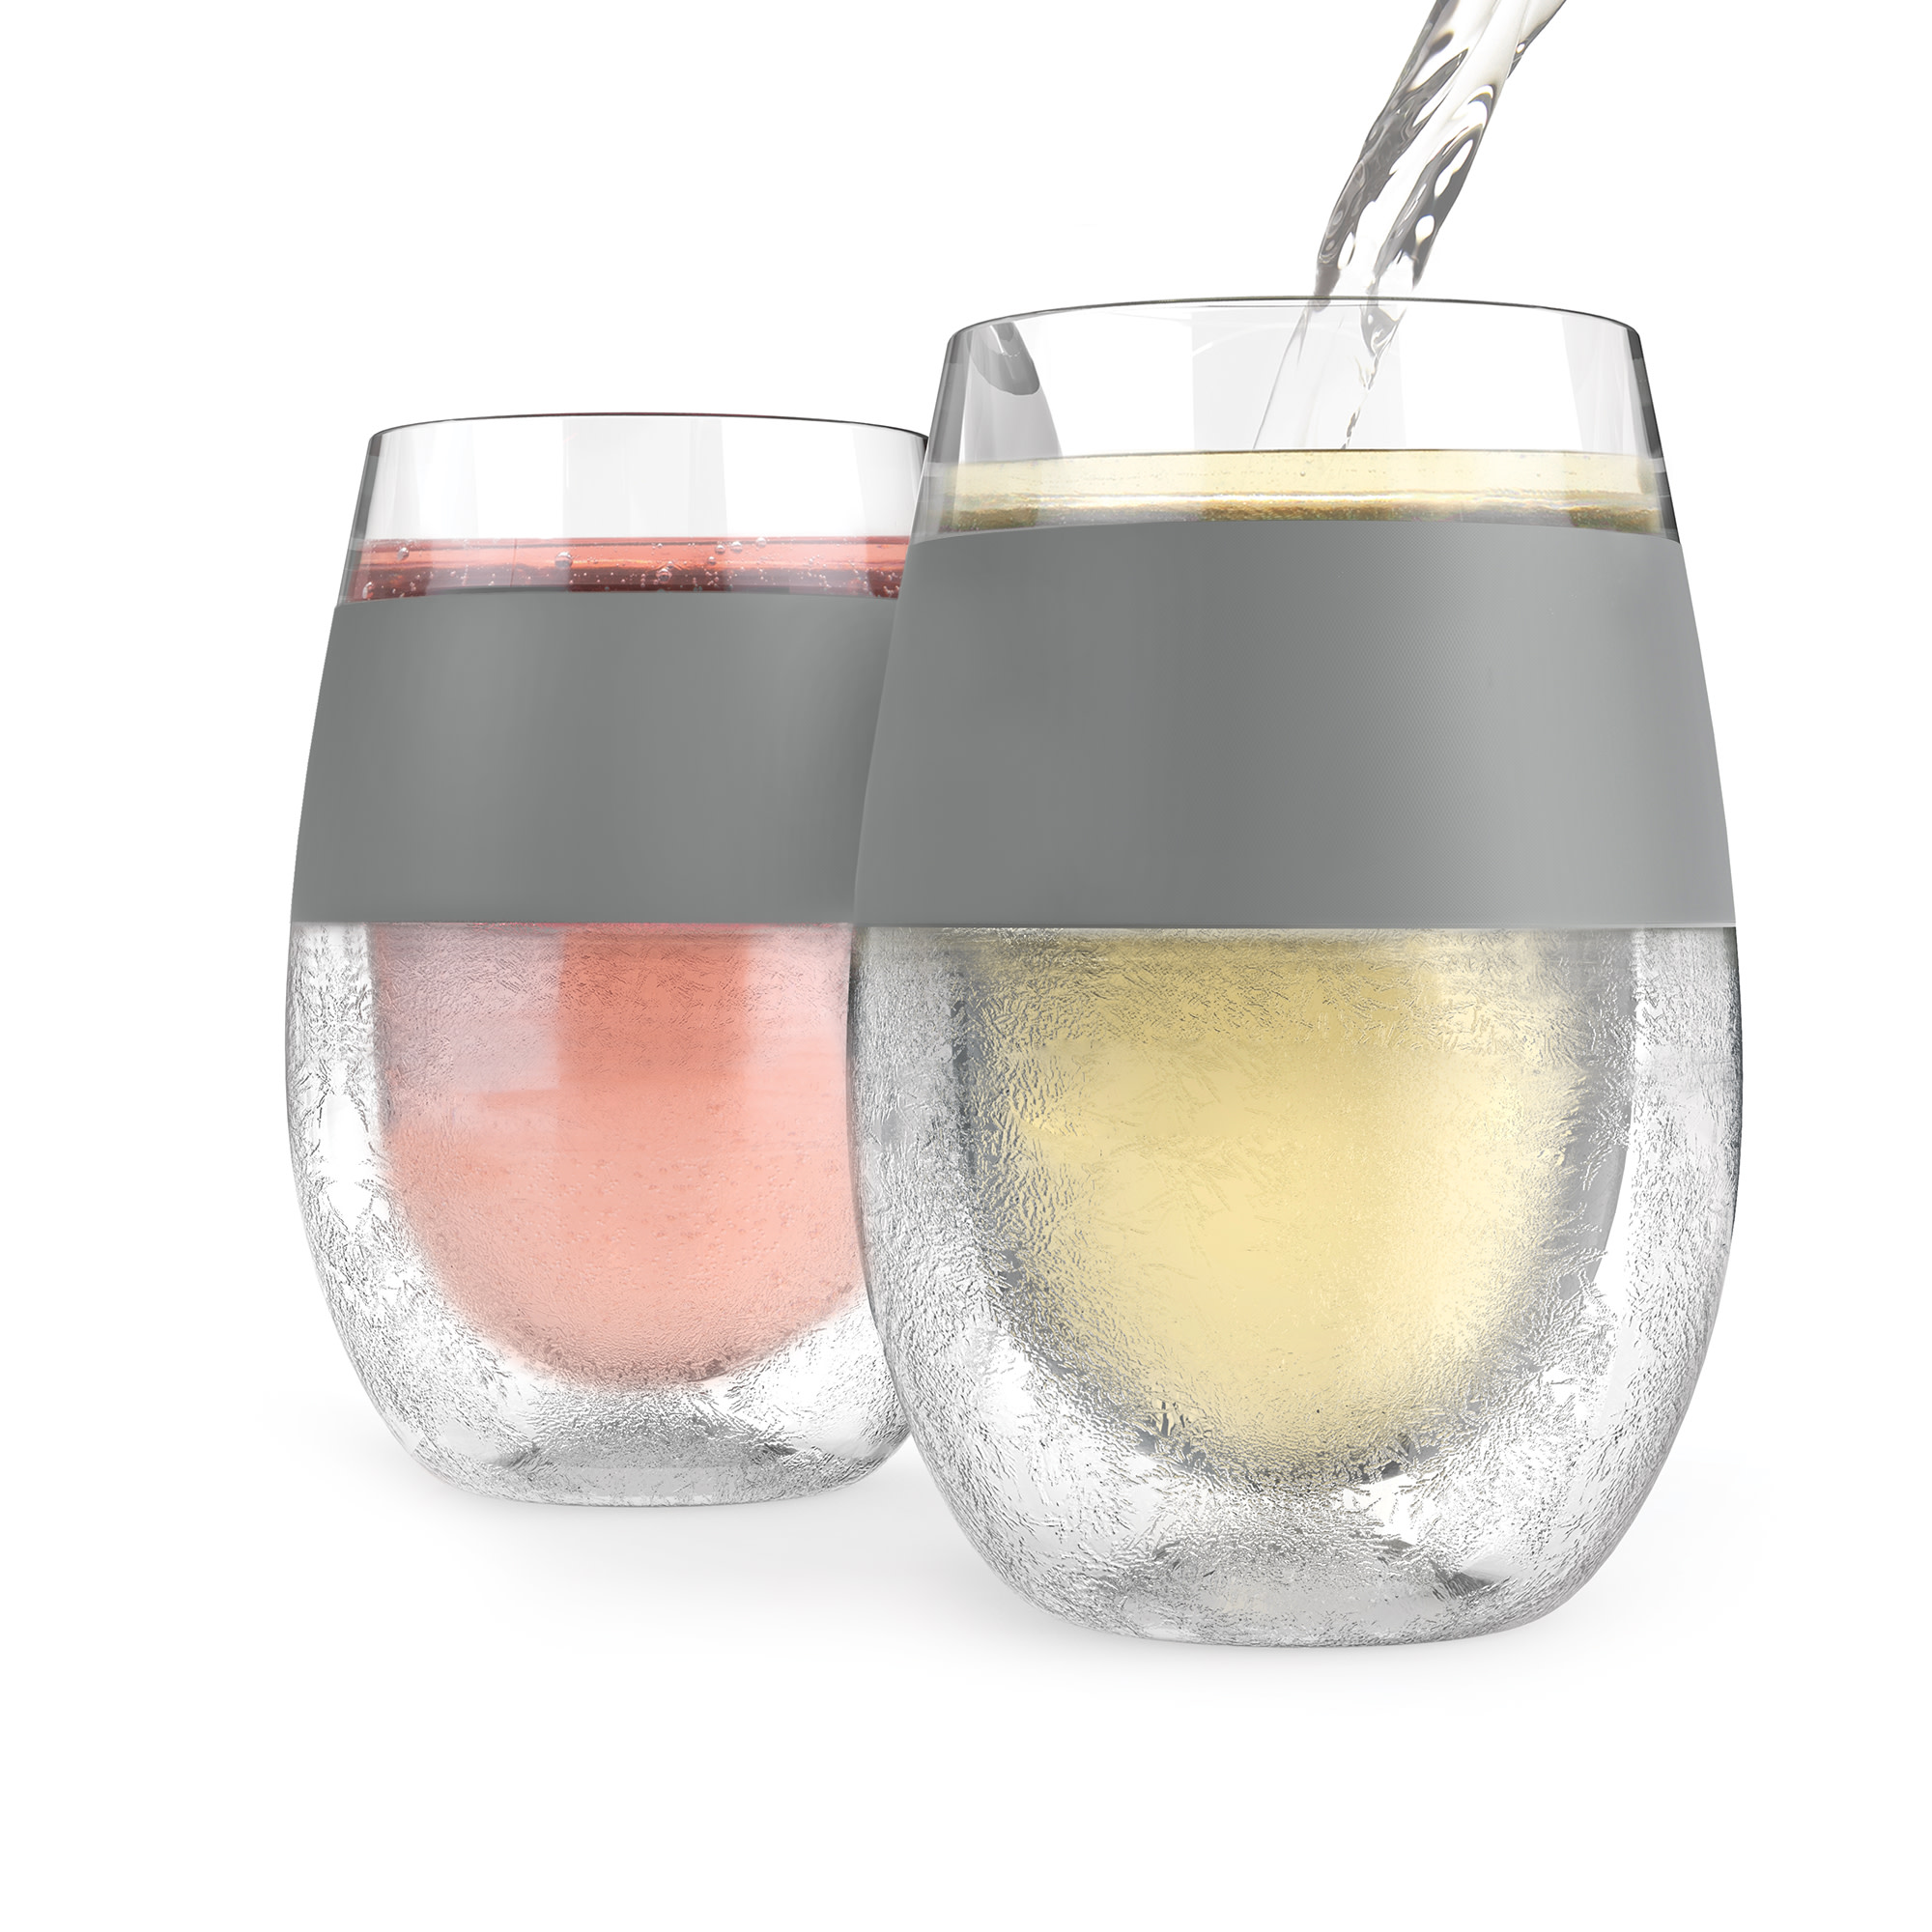 Host Plastic Double Wall Insulated Wine Freeze Cup Set Wine Glass, 8.5 oz  Grey